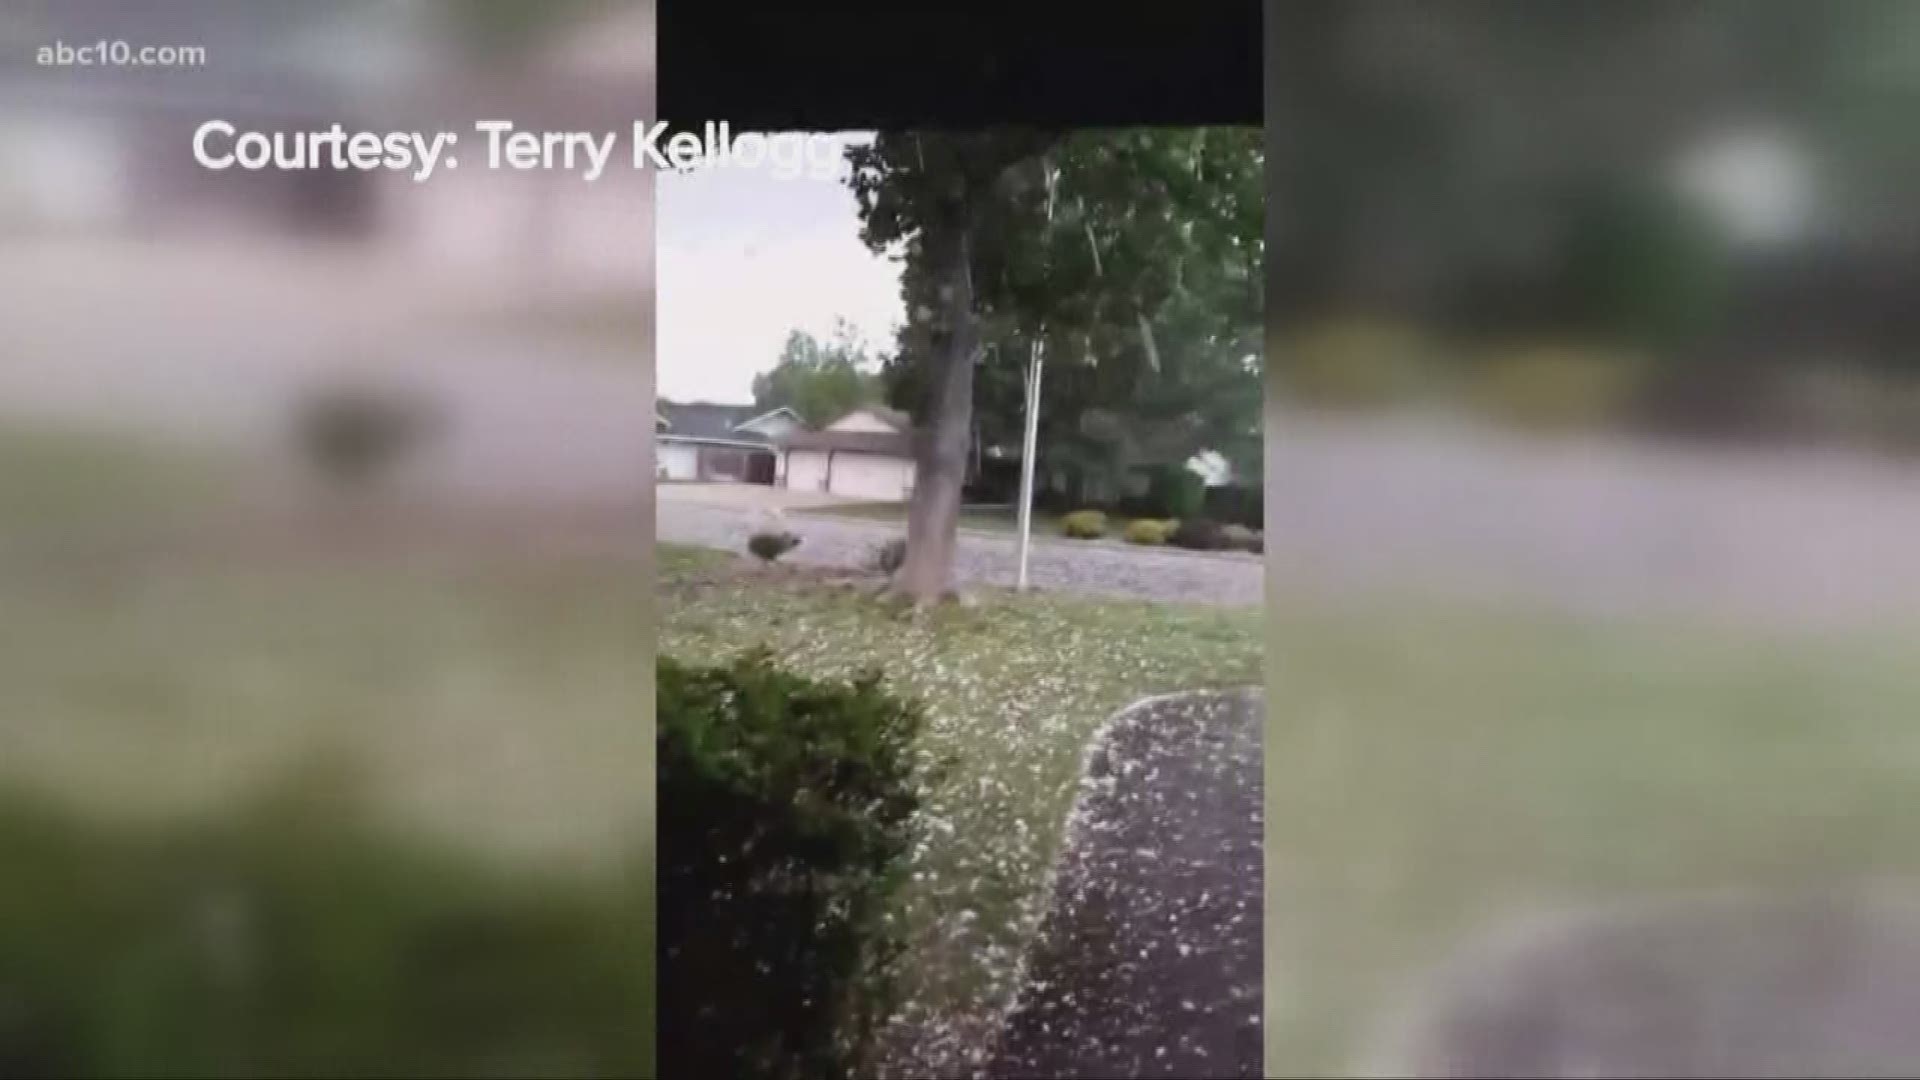 The Redding weather brought a "supercell" thunderstorm that dropped golf ball sized hail on the communities on Friday.